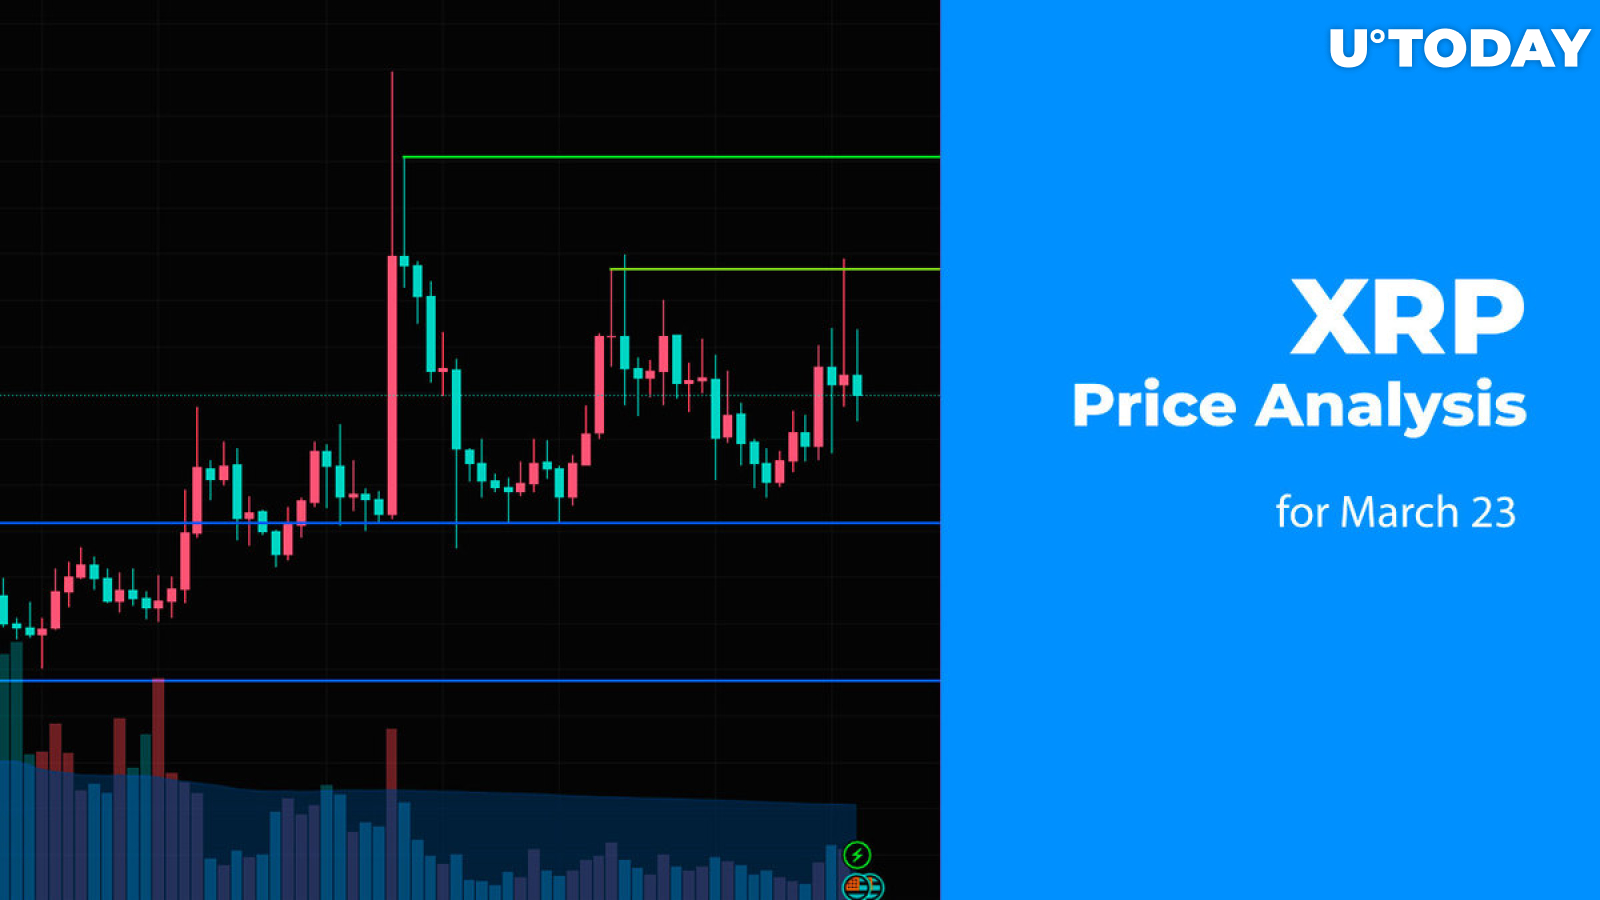 XRP Price Prediction for March 23